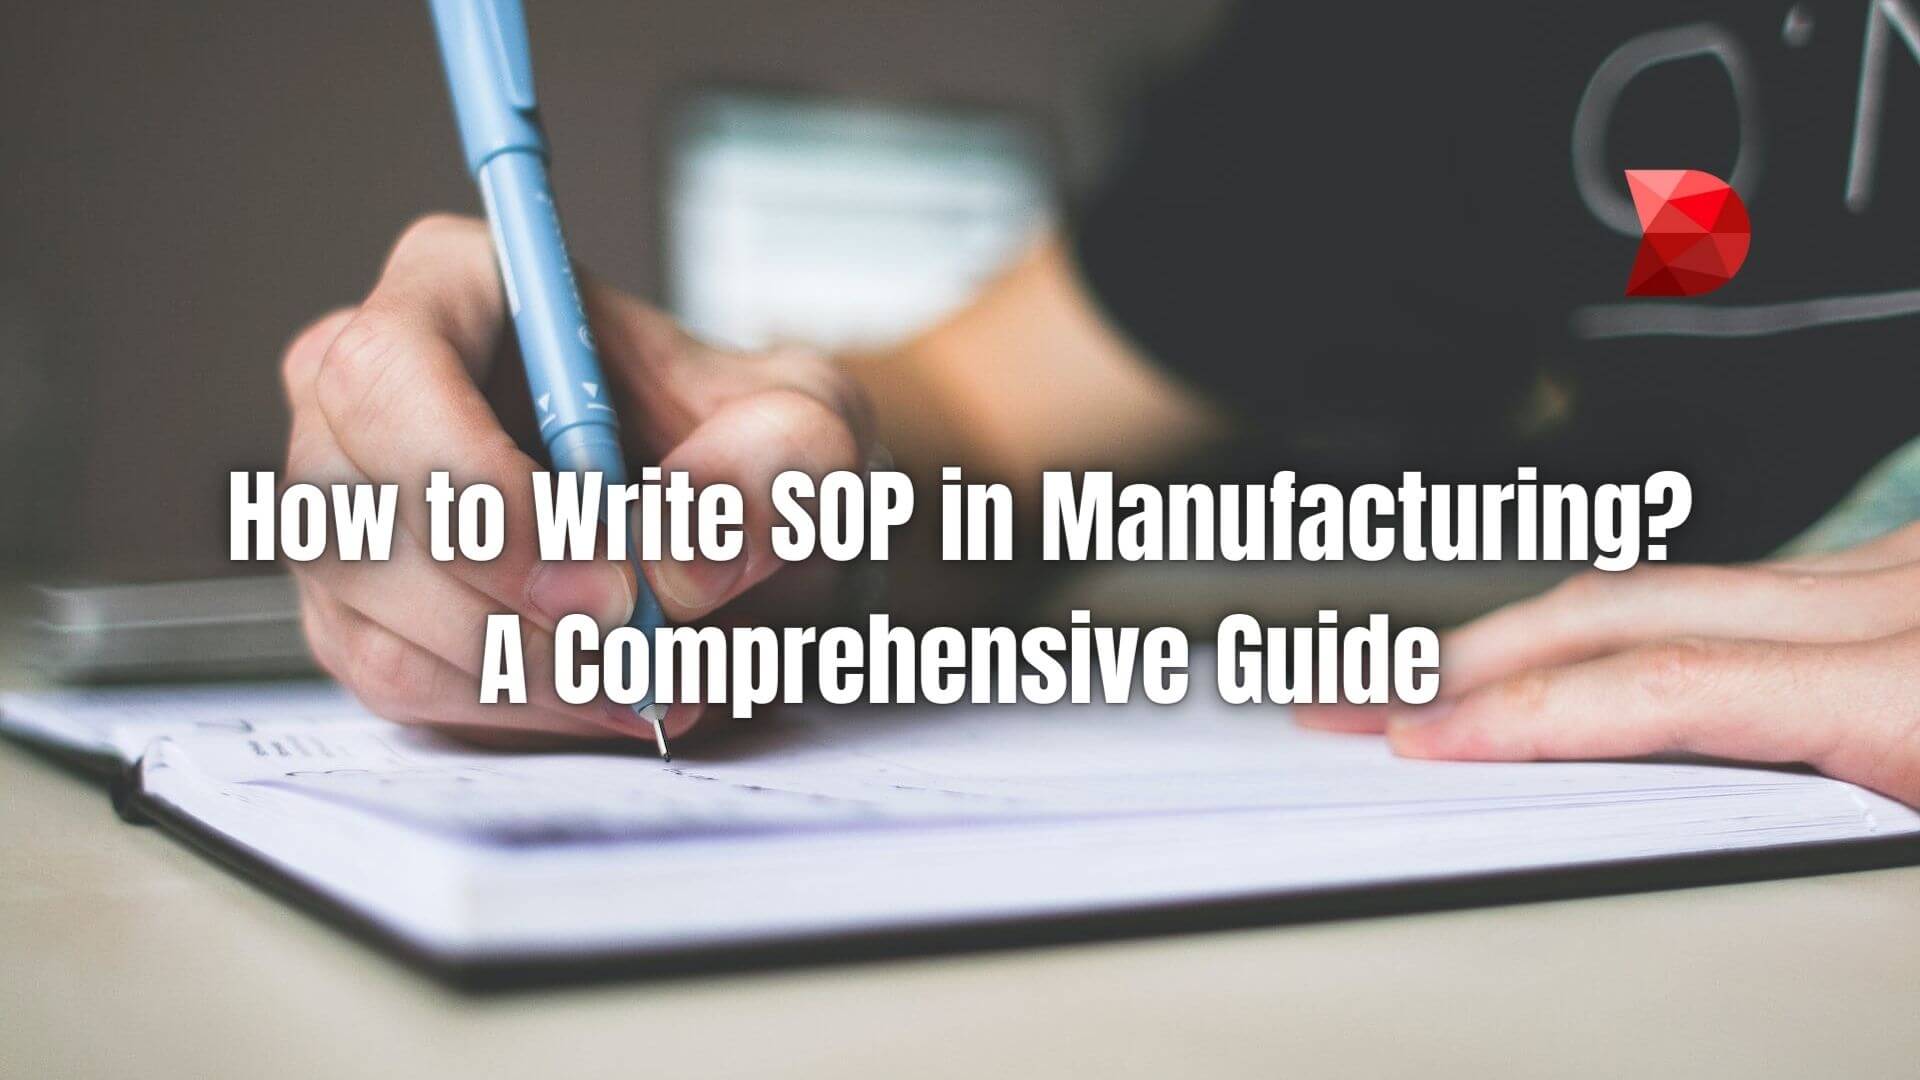 Maximize manufacturing efficiency with our guide to SOP writing. Learn essential techniques for creating clear and effective SOPs.